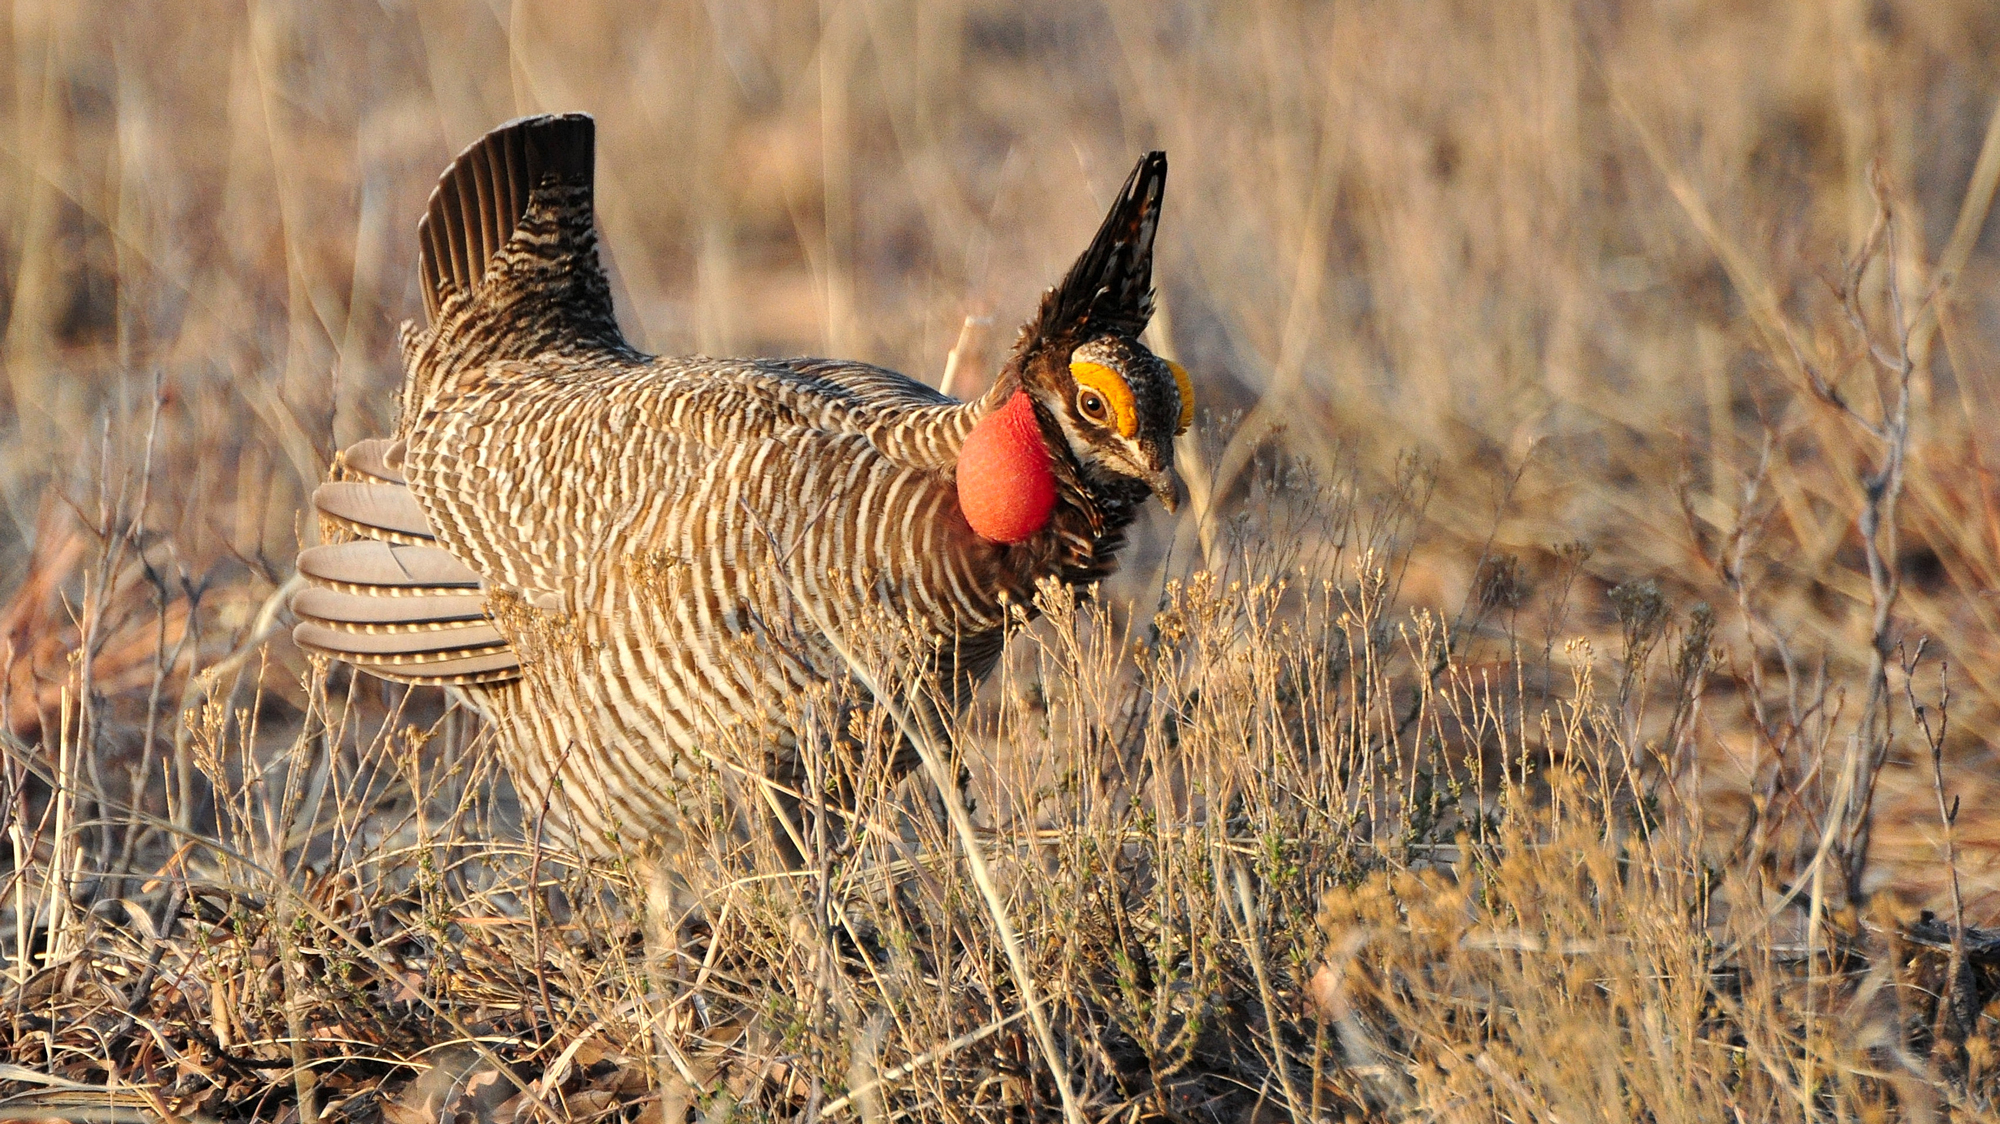 Lesser Prairie-Chicken. This year Cornell's Team Sapsucker will be in Colorado to highlight the conservation needs of the shortgrass prairie and birds like the Lesser Prairie-Chicken. Photo © Larry Lamsa via Wikimedia Commons [CC BY 2.0]